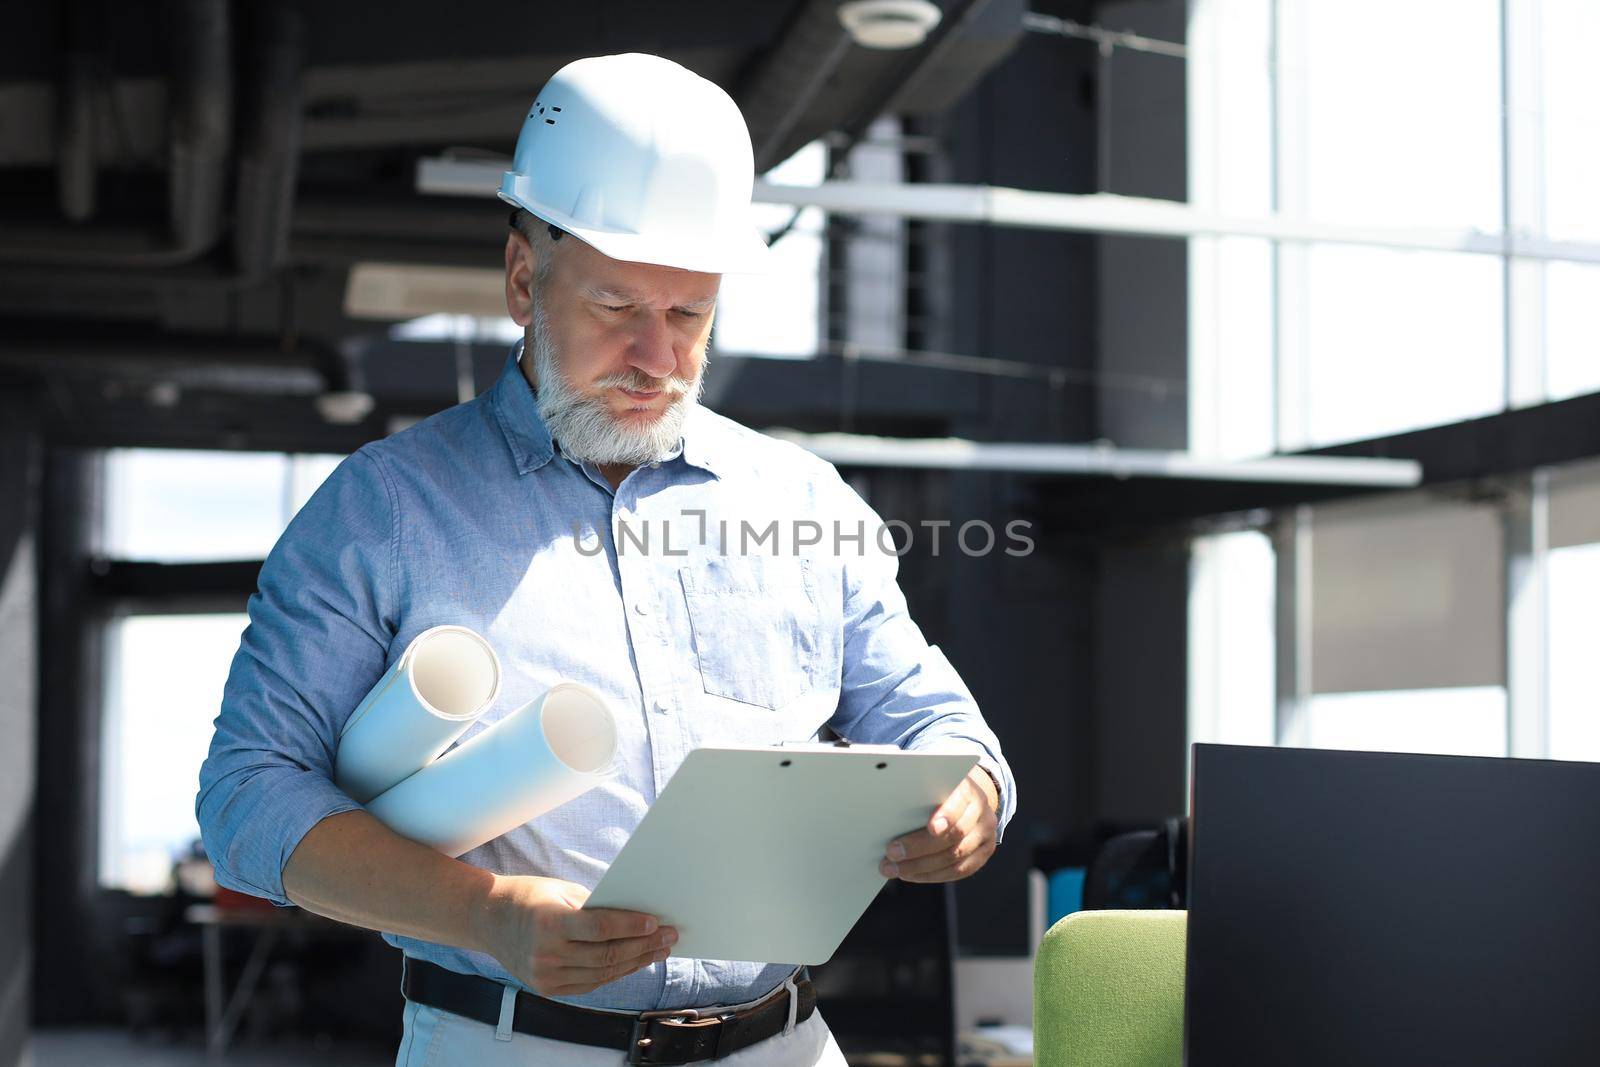 Mature architect wearing hardhat inspecting new building. by tsyhun